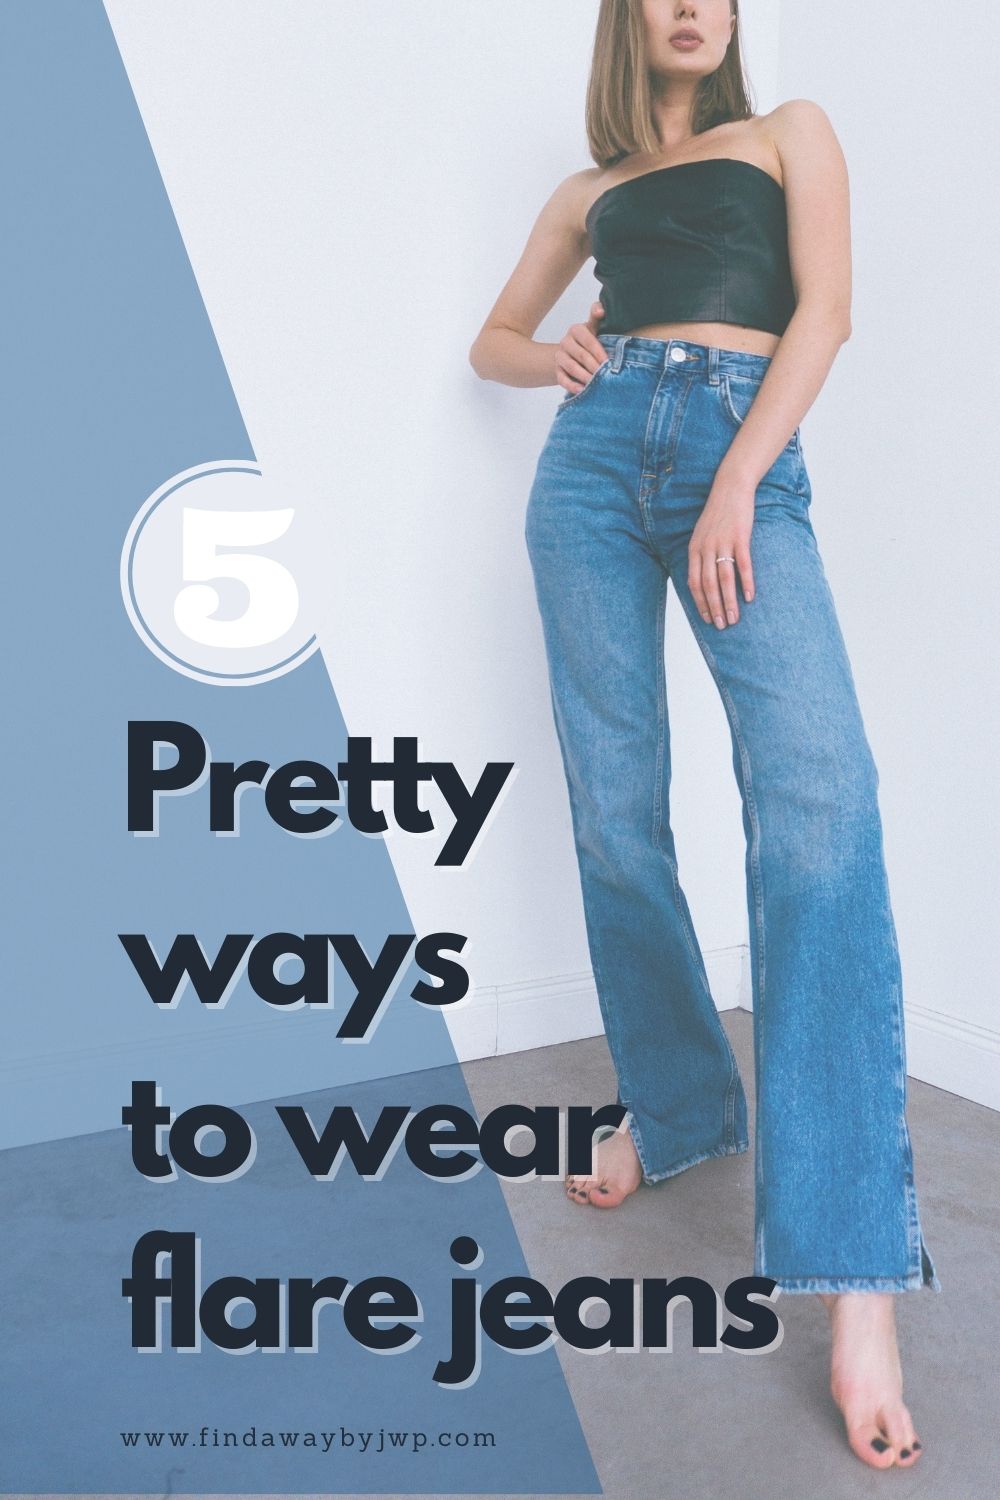 https://findawaybyjwp.com/wp-content/uploads/2023/02/Pretty-ways-to-wear-flare-jeans.jpg